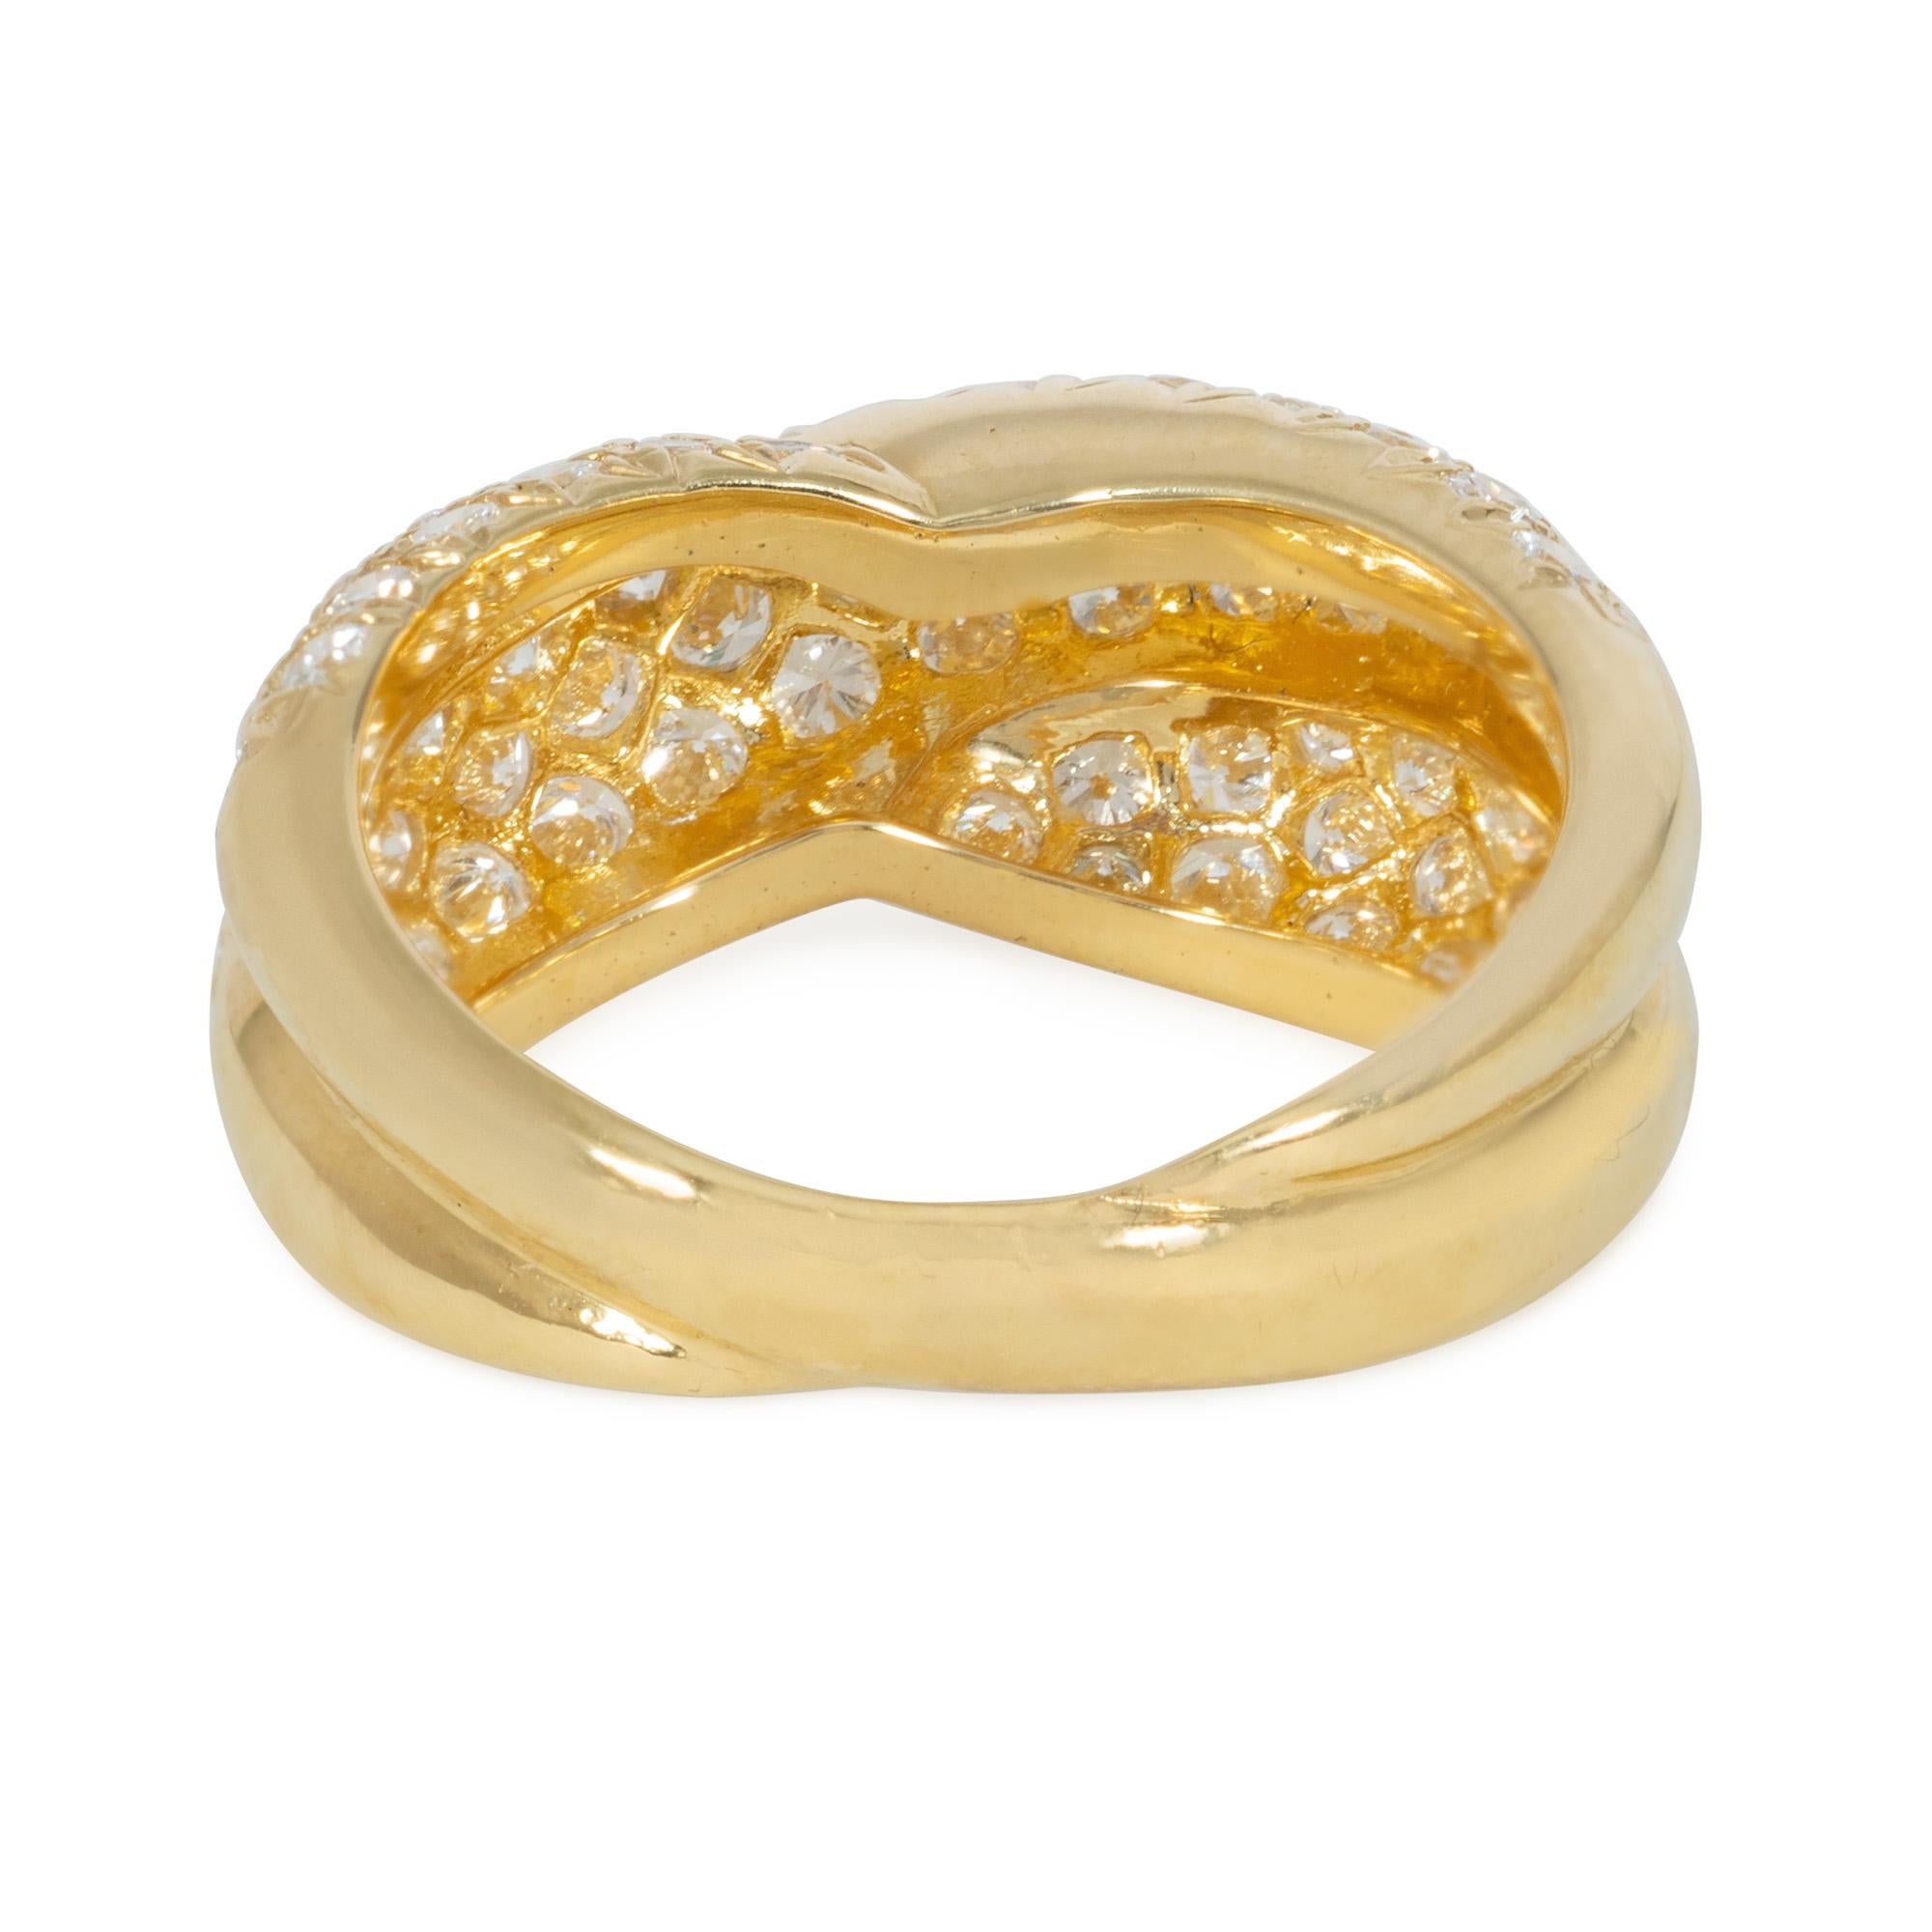 Contemporary Estate Van Cleef & Arpels, Paris Gold and Diamond Band Ring of Crossover Design For Sale